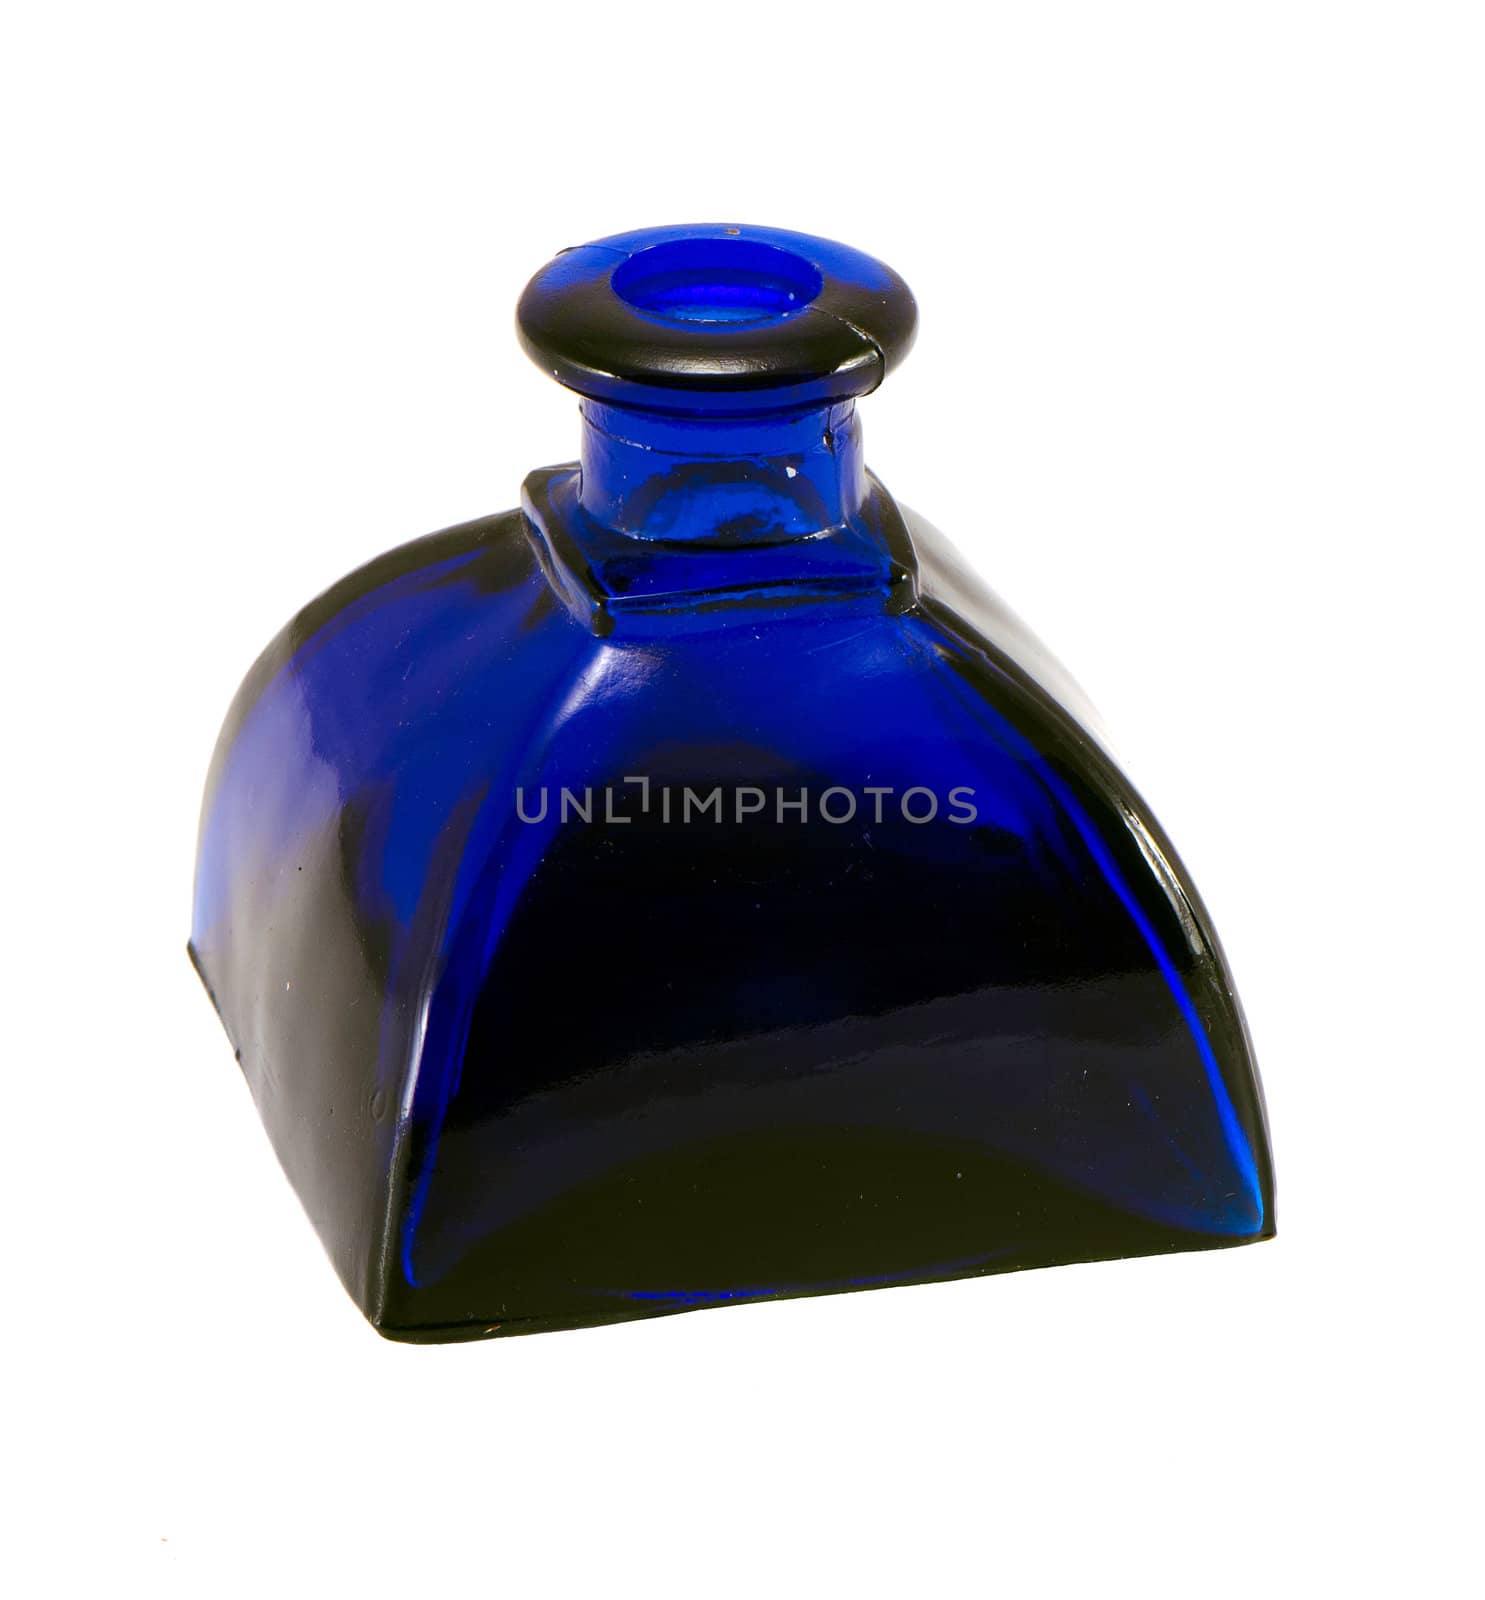 Retro vintage bottle made of blue glass isolated on white background.